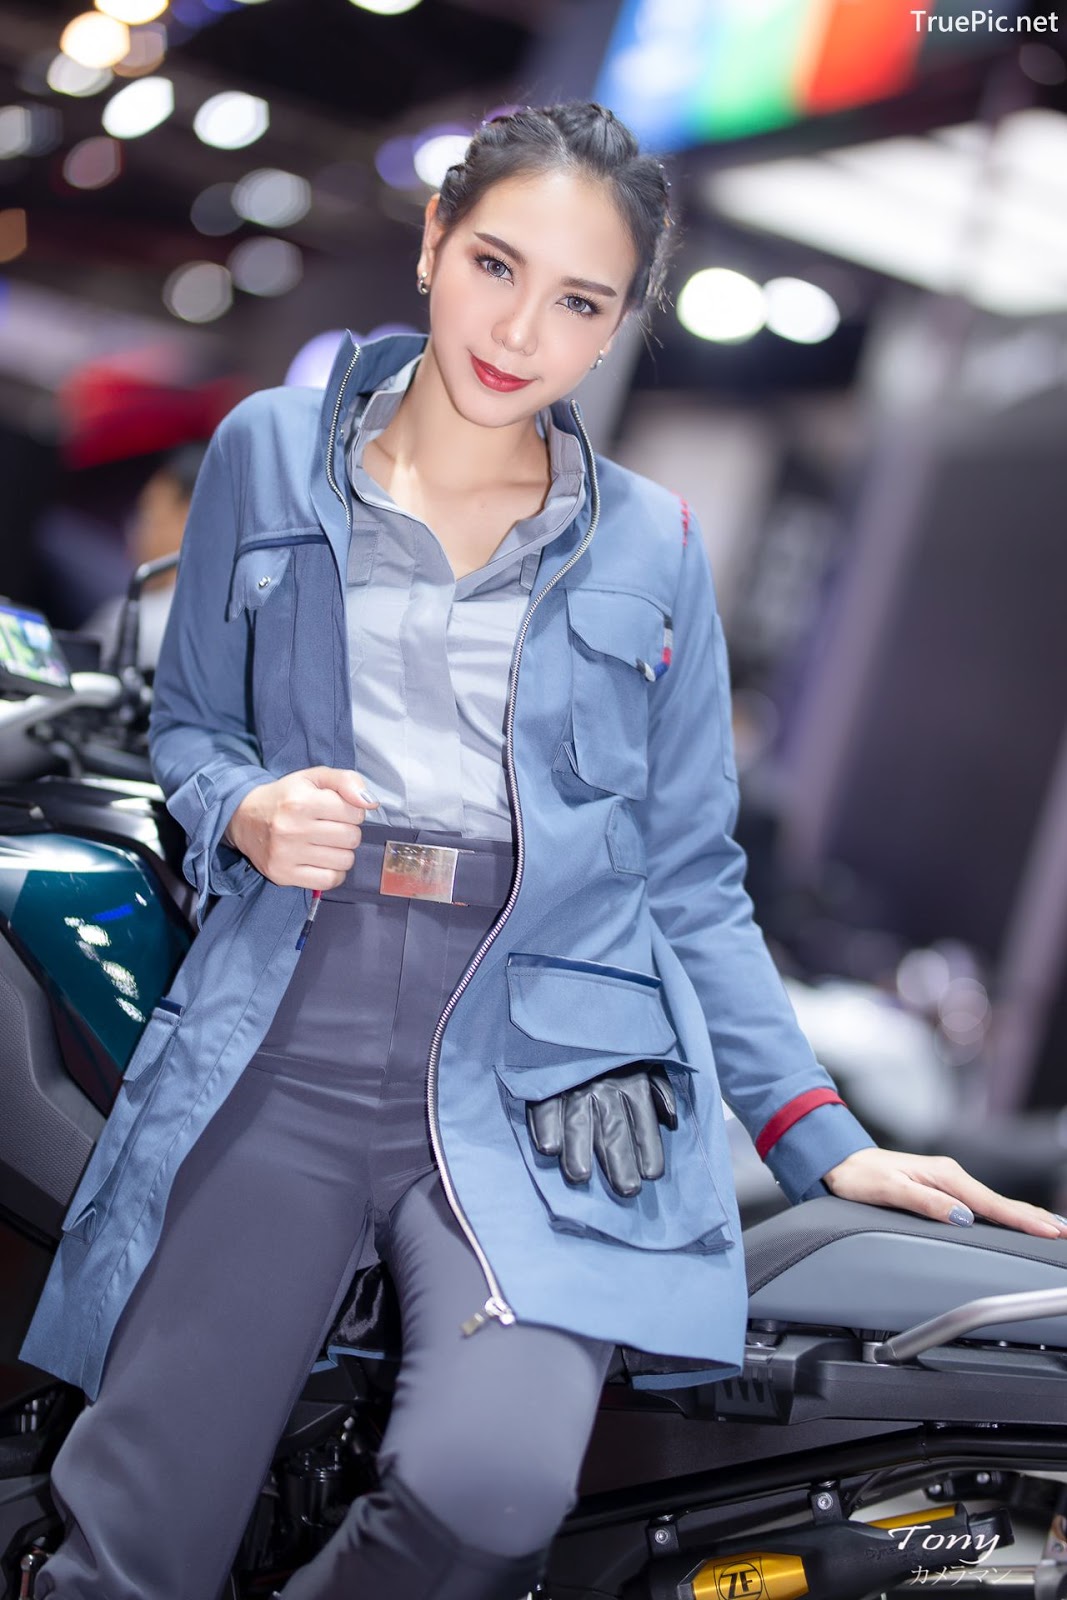 Image-Thailand-Hot-Model-Thai-Racing-Girl-At-Motor-Show-2019-TruePic.net- Picture-27